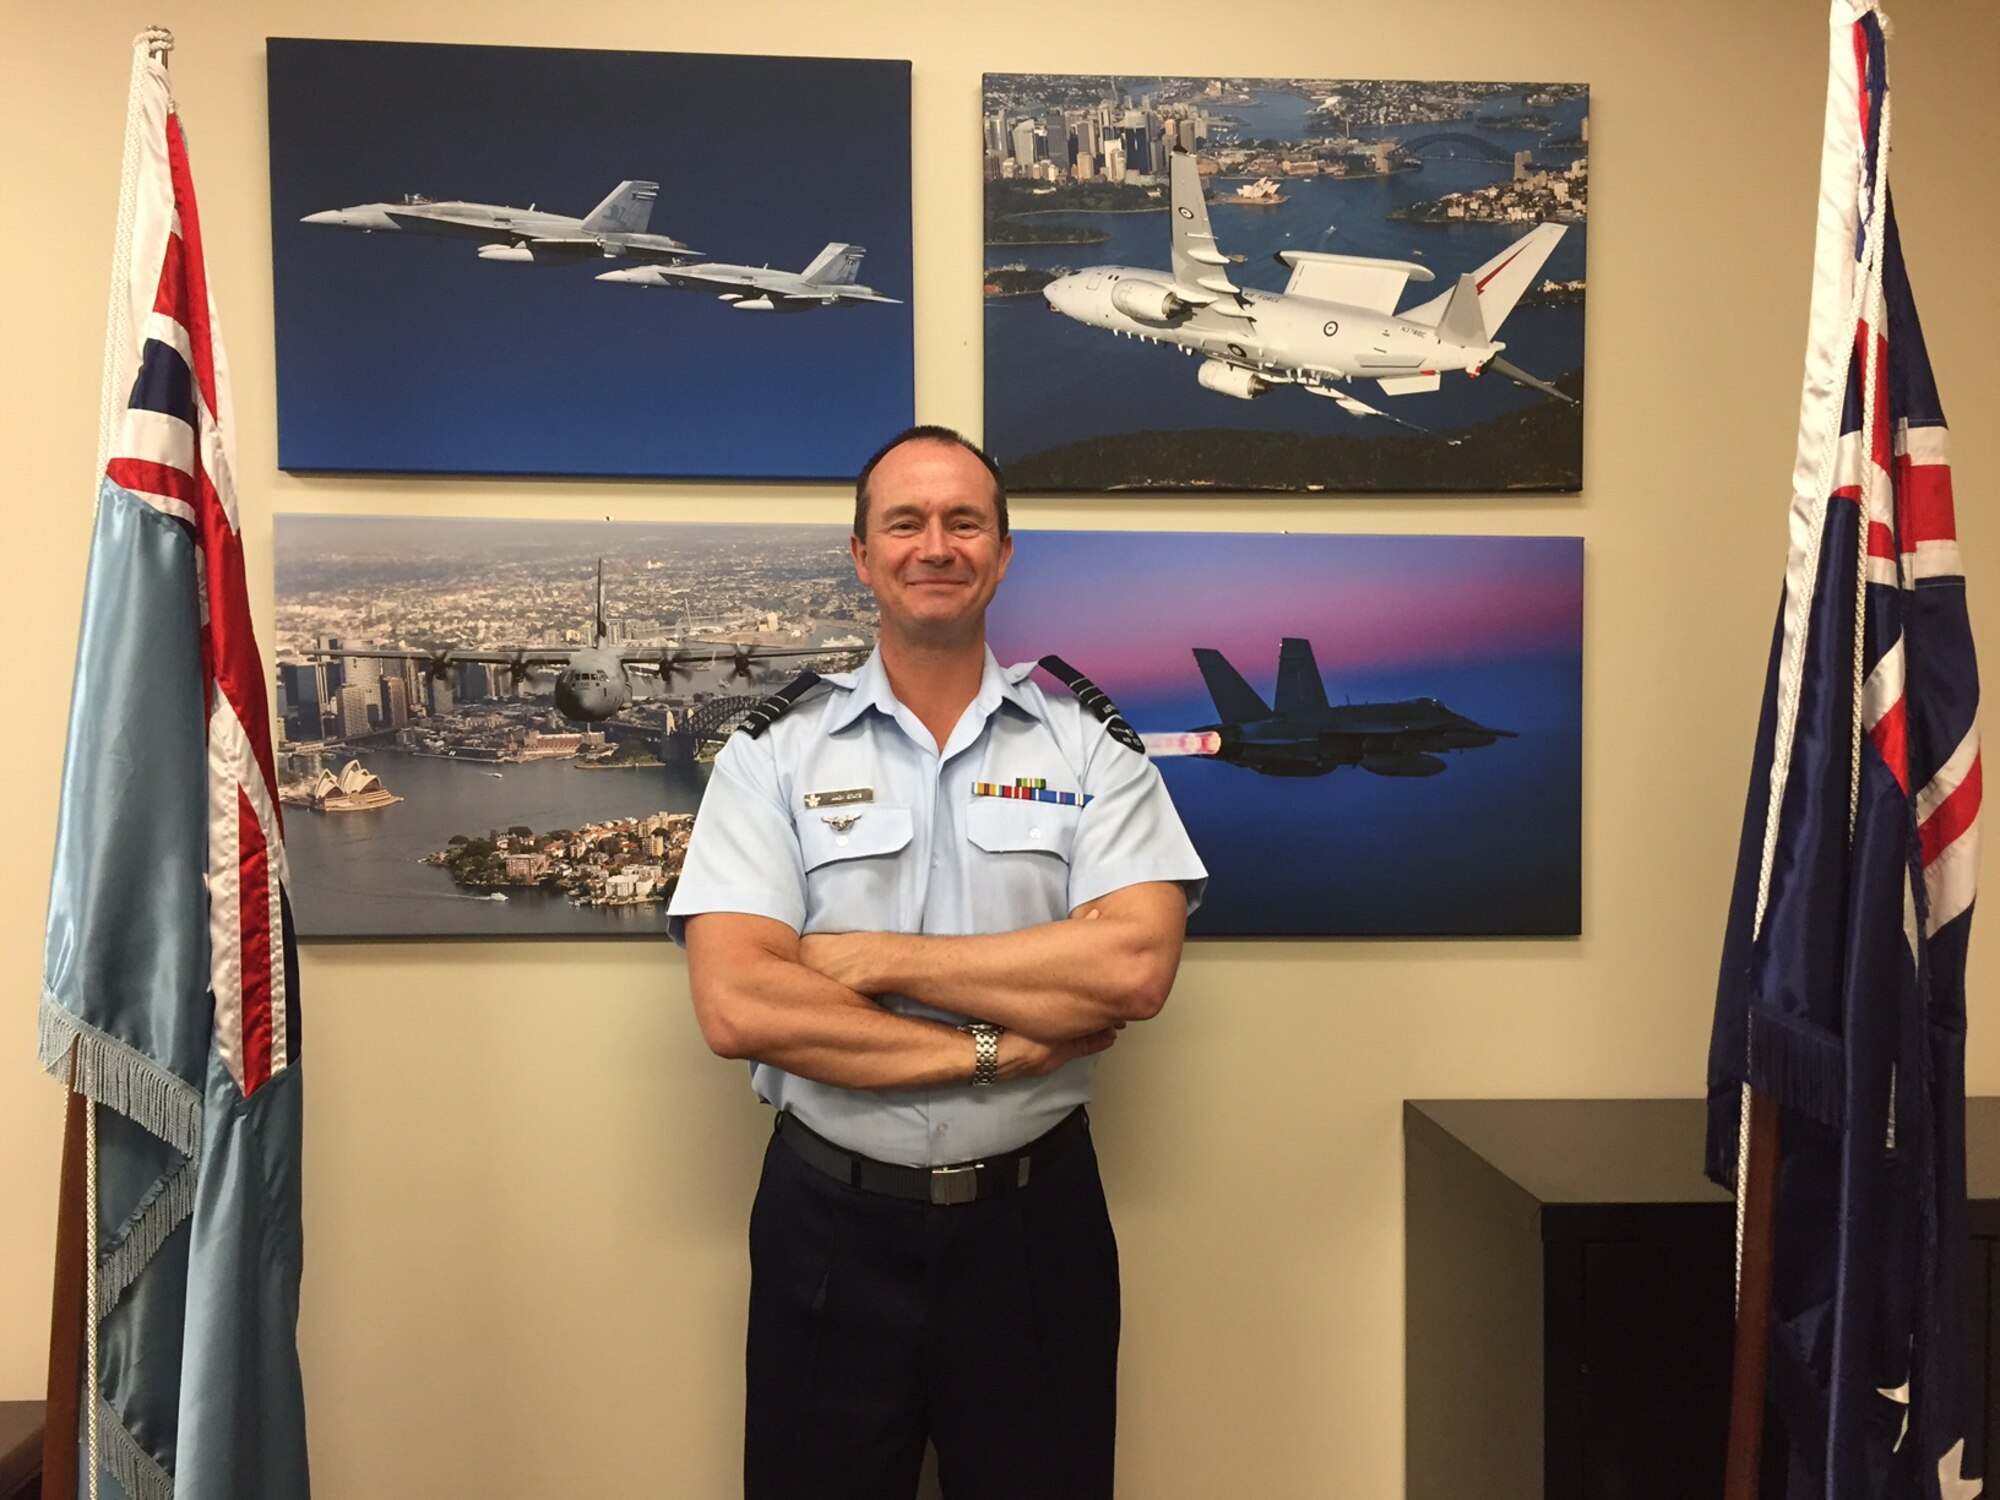 Wing Commander Andy State of Australia serves as chairman of the Foreign Liaison Officers, part of the Air Force Life Cycle Management Center’s Air Force Security Assistance and Cooperation Directorate, headquartered at Wright-Patterson Air Force Base. (Skywrighter photo/Amy Rollins)